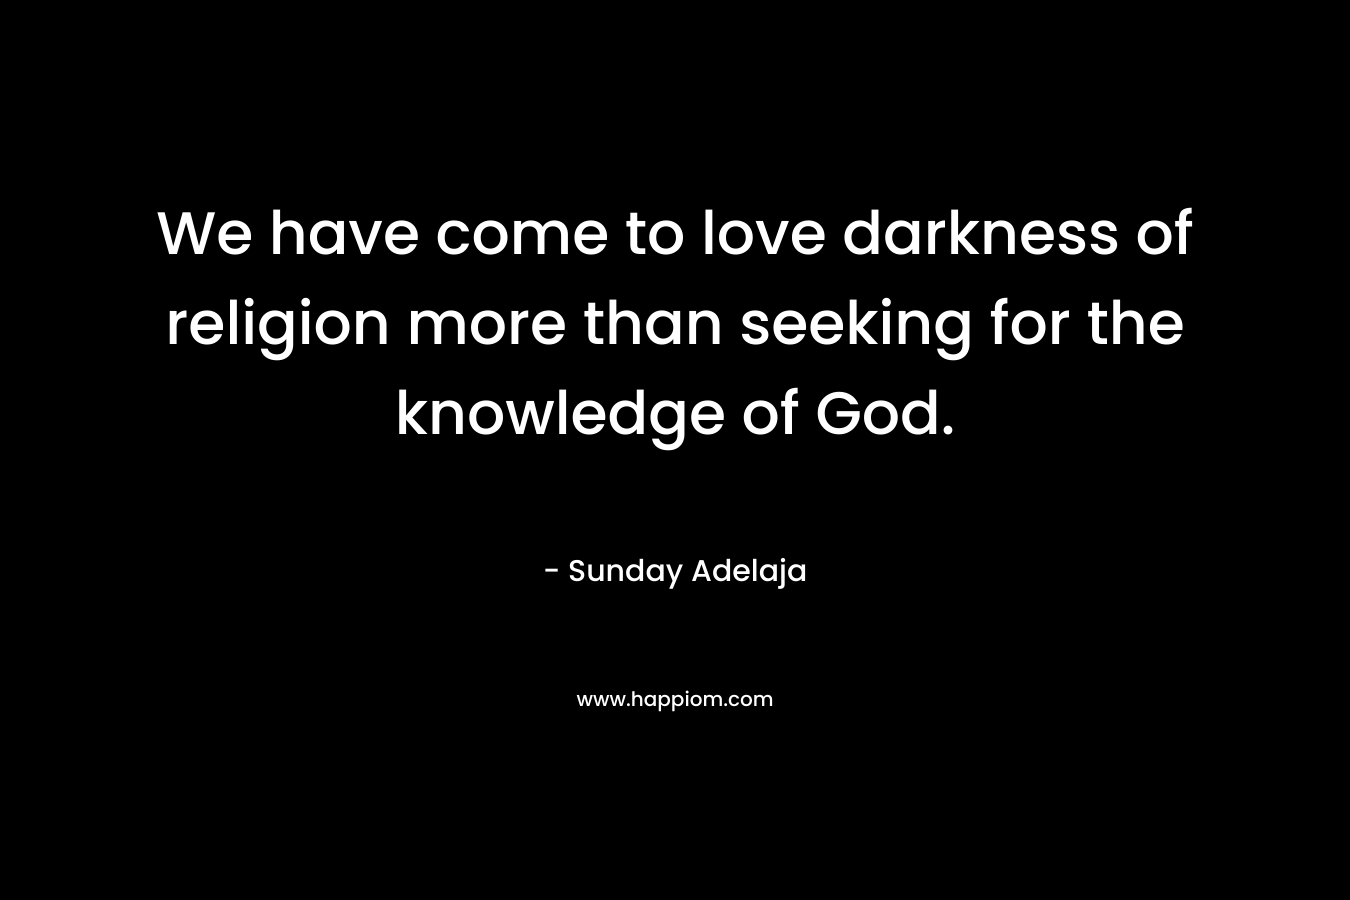 We have come to love darkness of religion more than seeking for the knowledge of God.